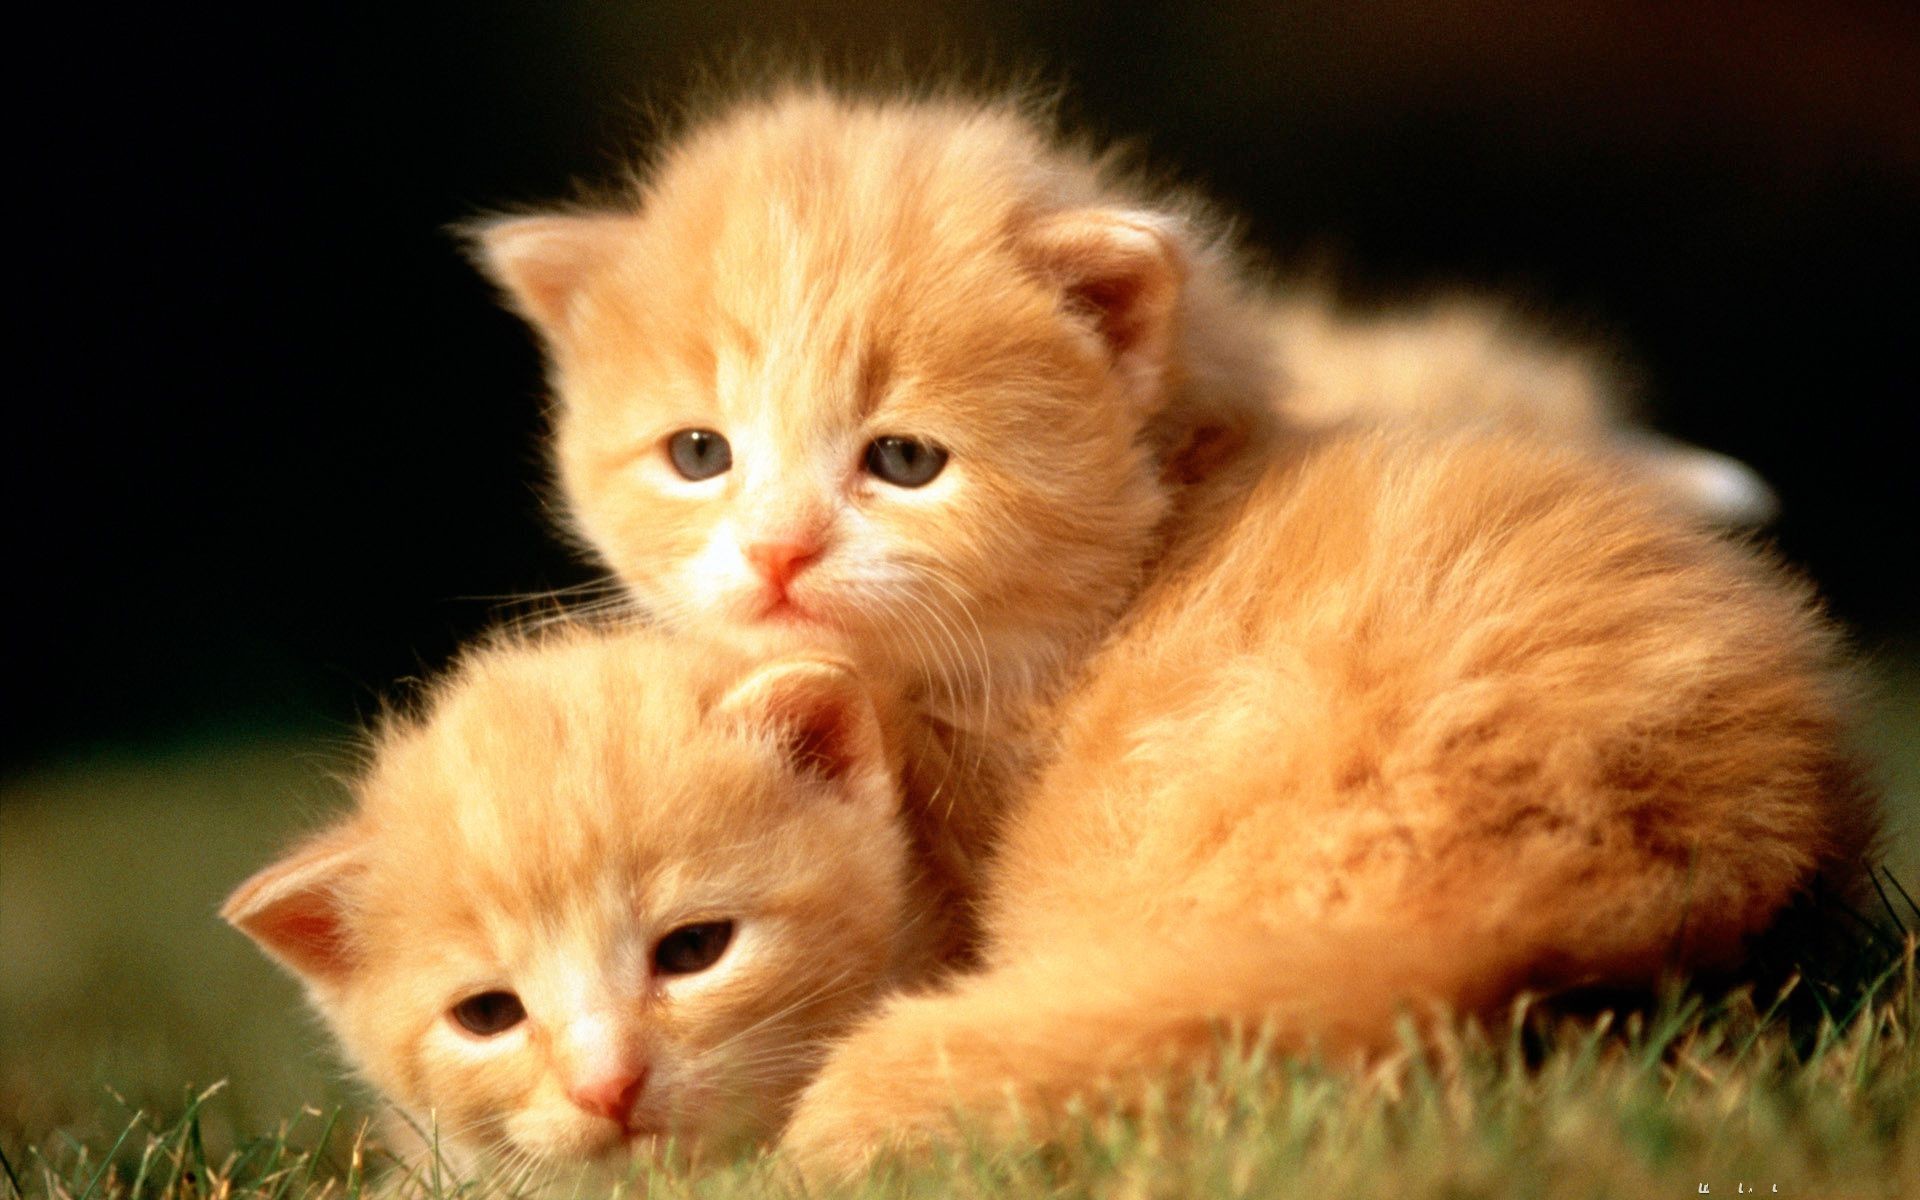 Baby Animal Wallpaper Hd Images 1920x1200